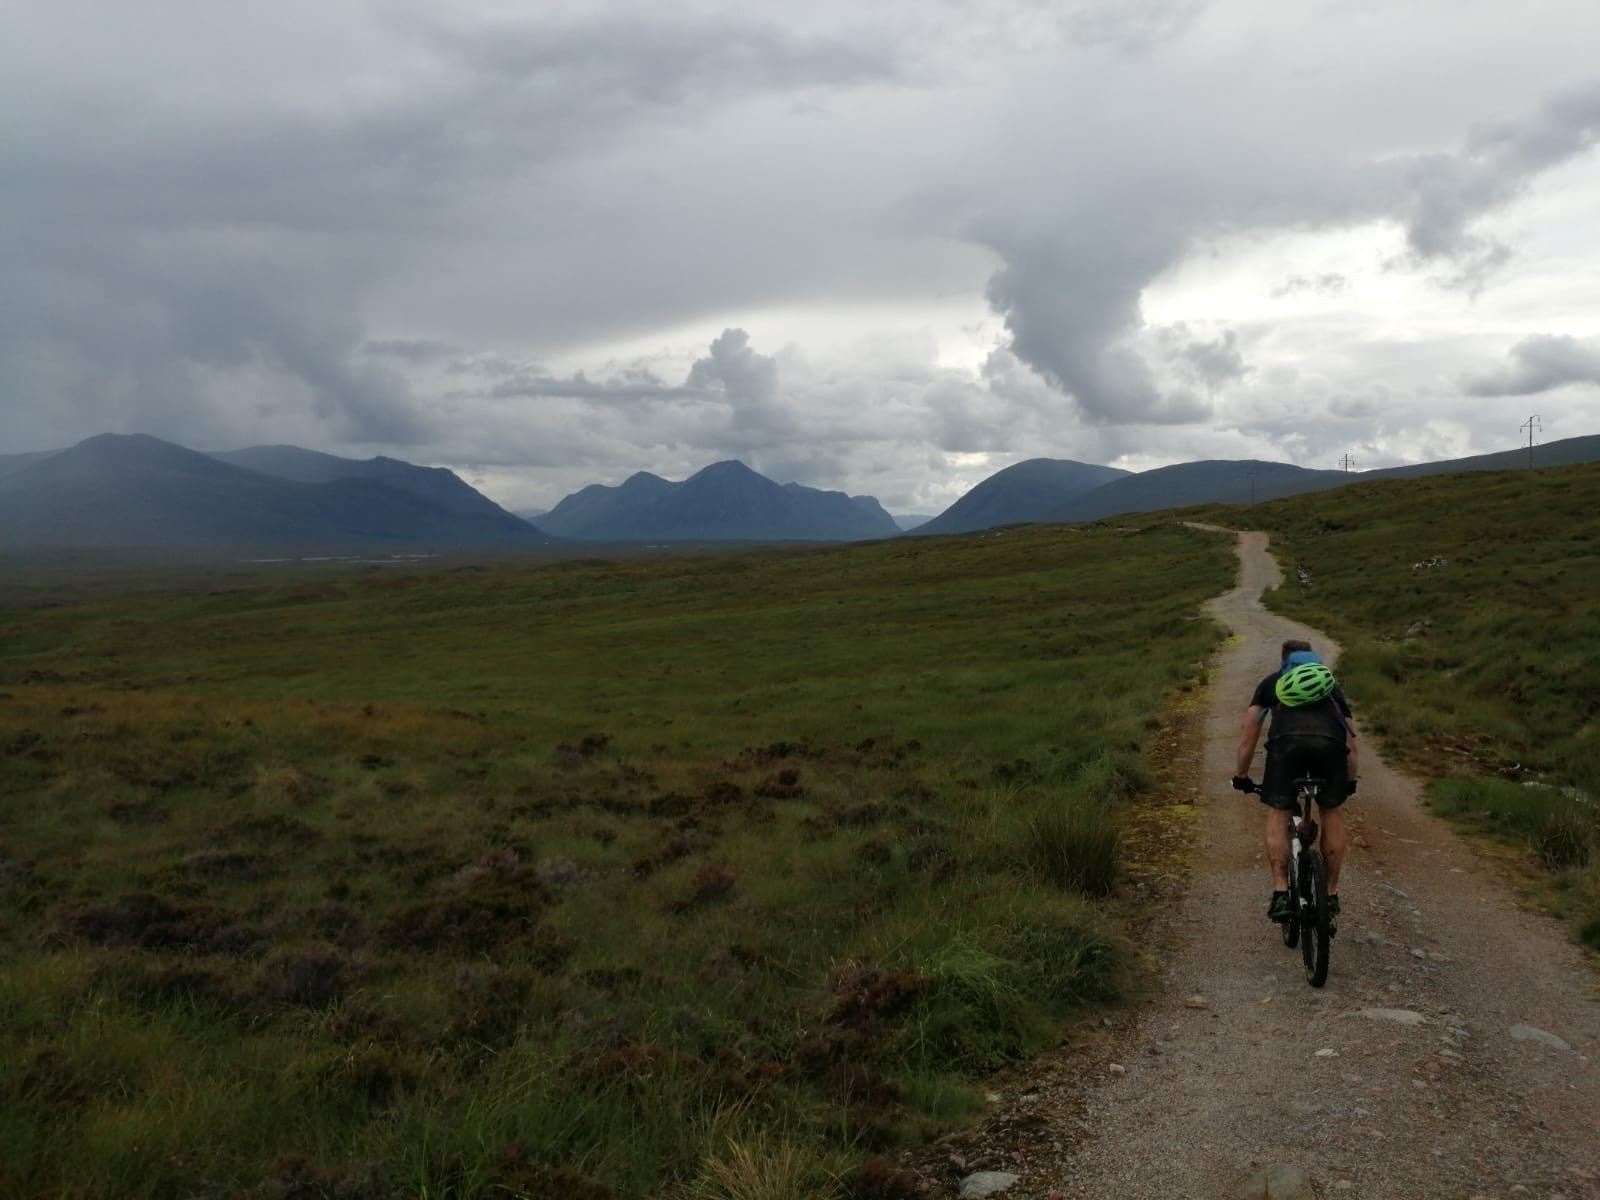 Access rights and responsibilities apply to any form of non-motorised transport, including cycling – such as on this route near Rannoch station.